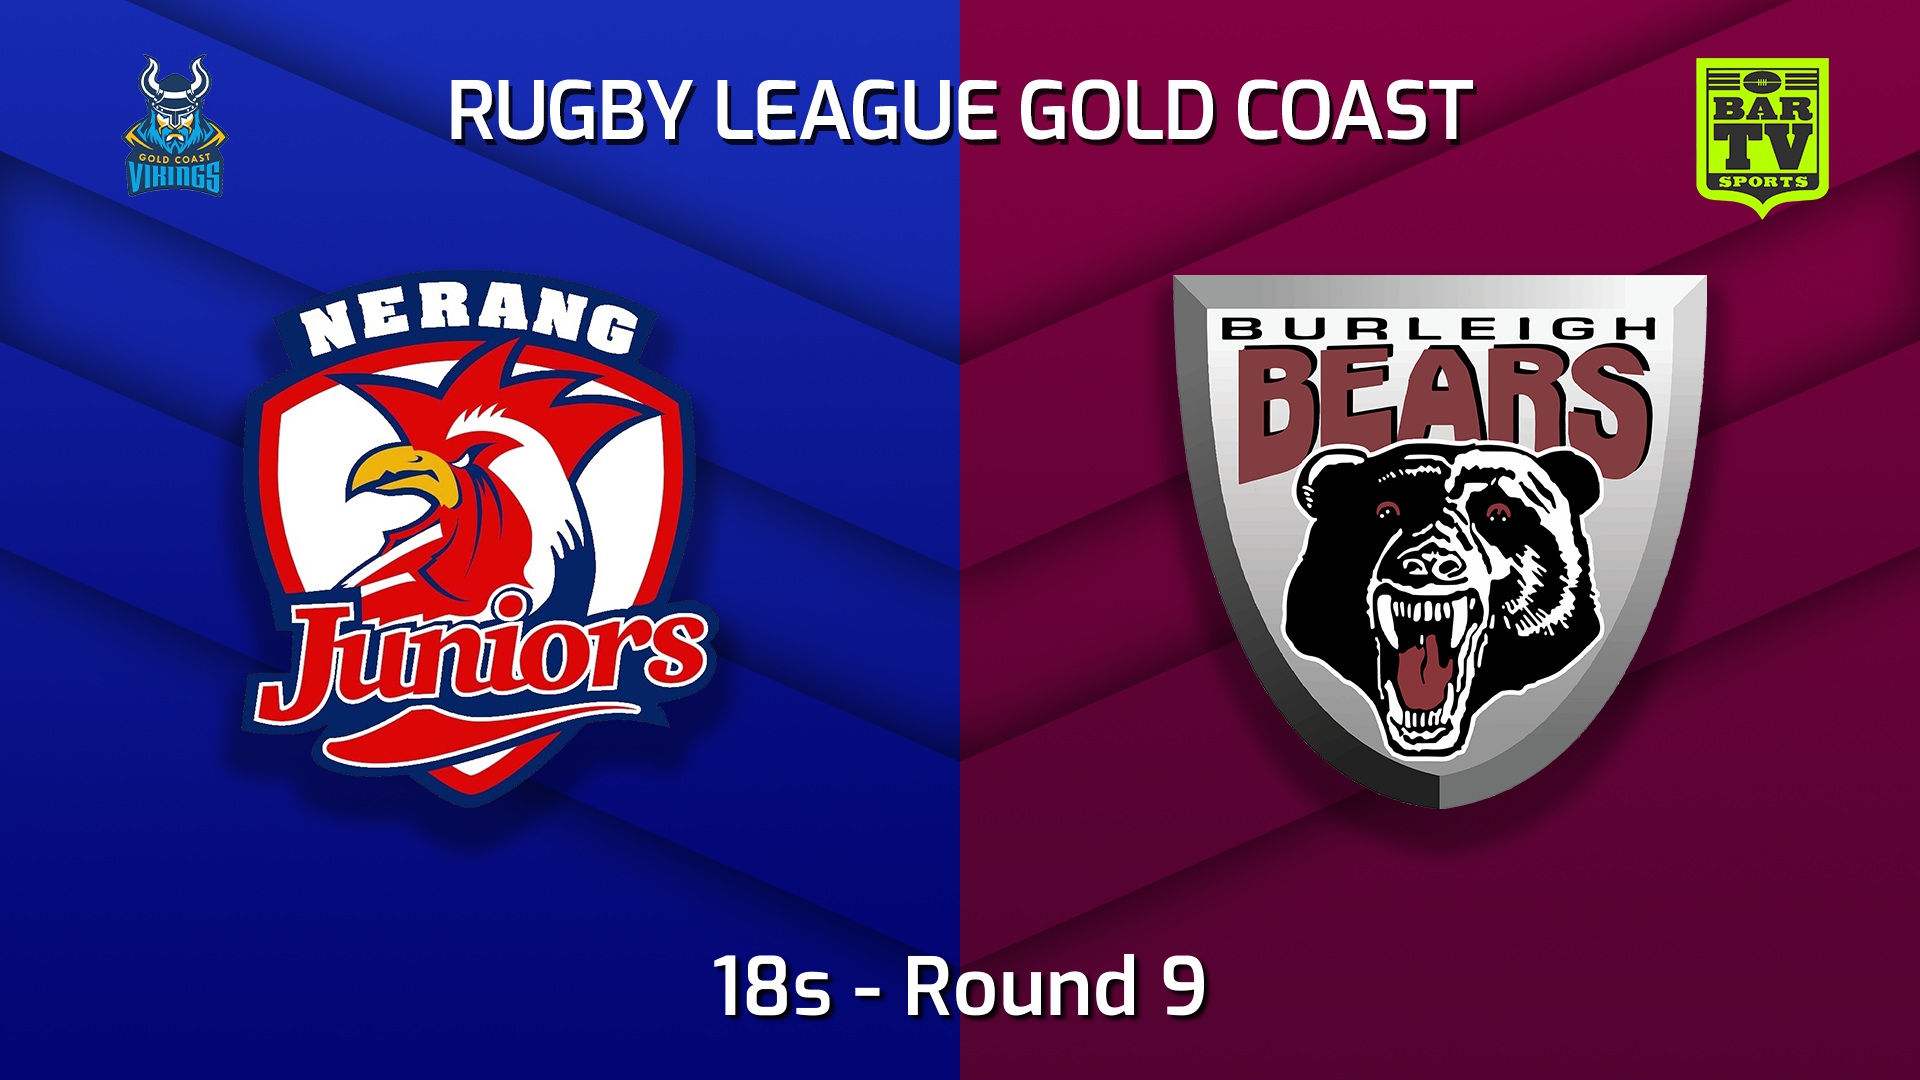 Gold Coast Round 9 - 18s - Nerang Roosters v Burleigh Bears live video ...